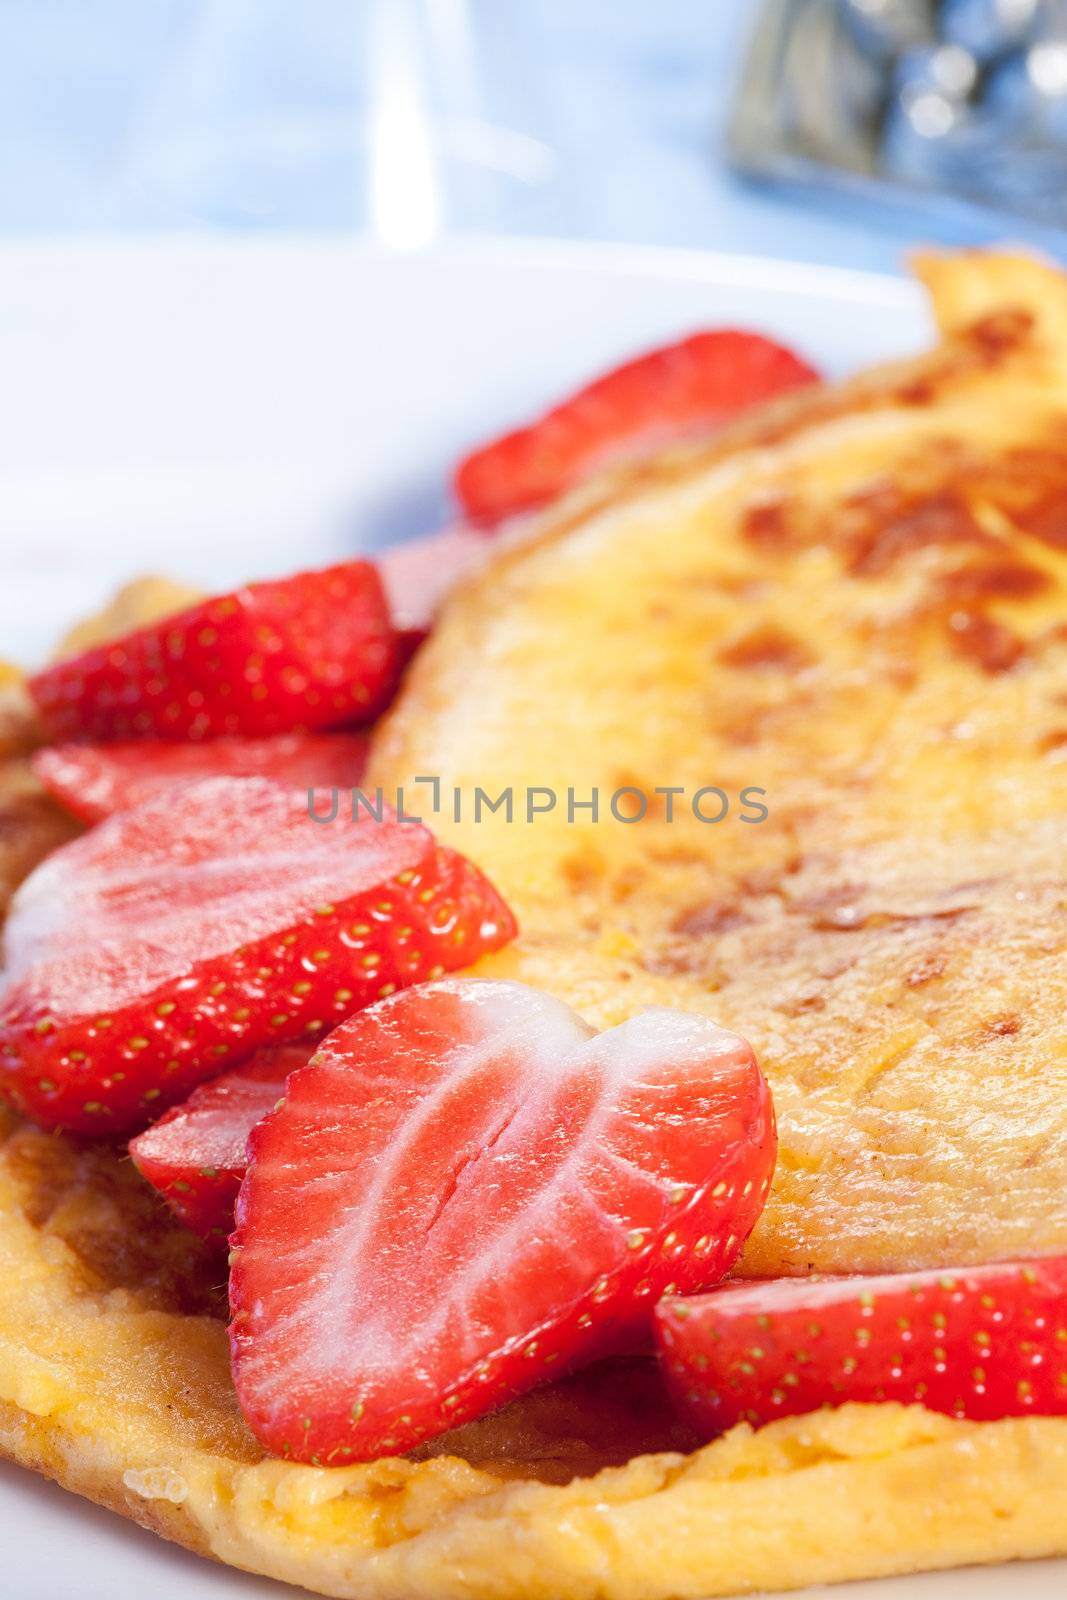 Strawberry omelette by Gravicapa